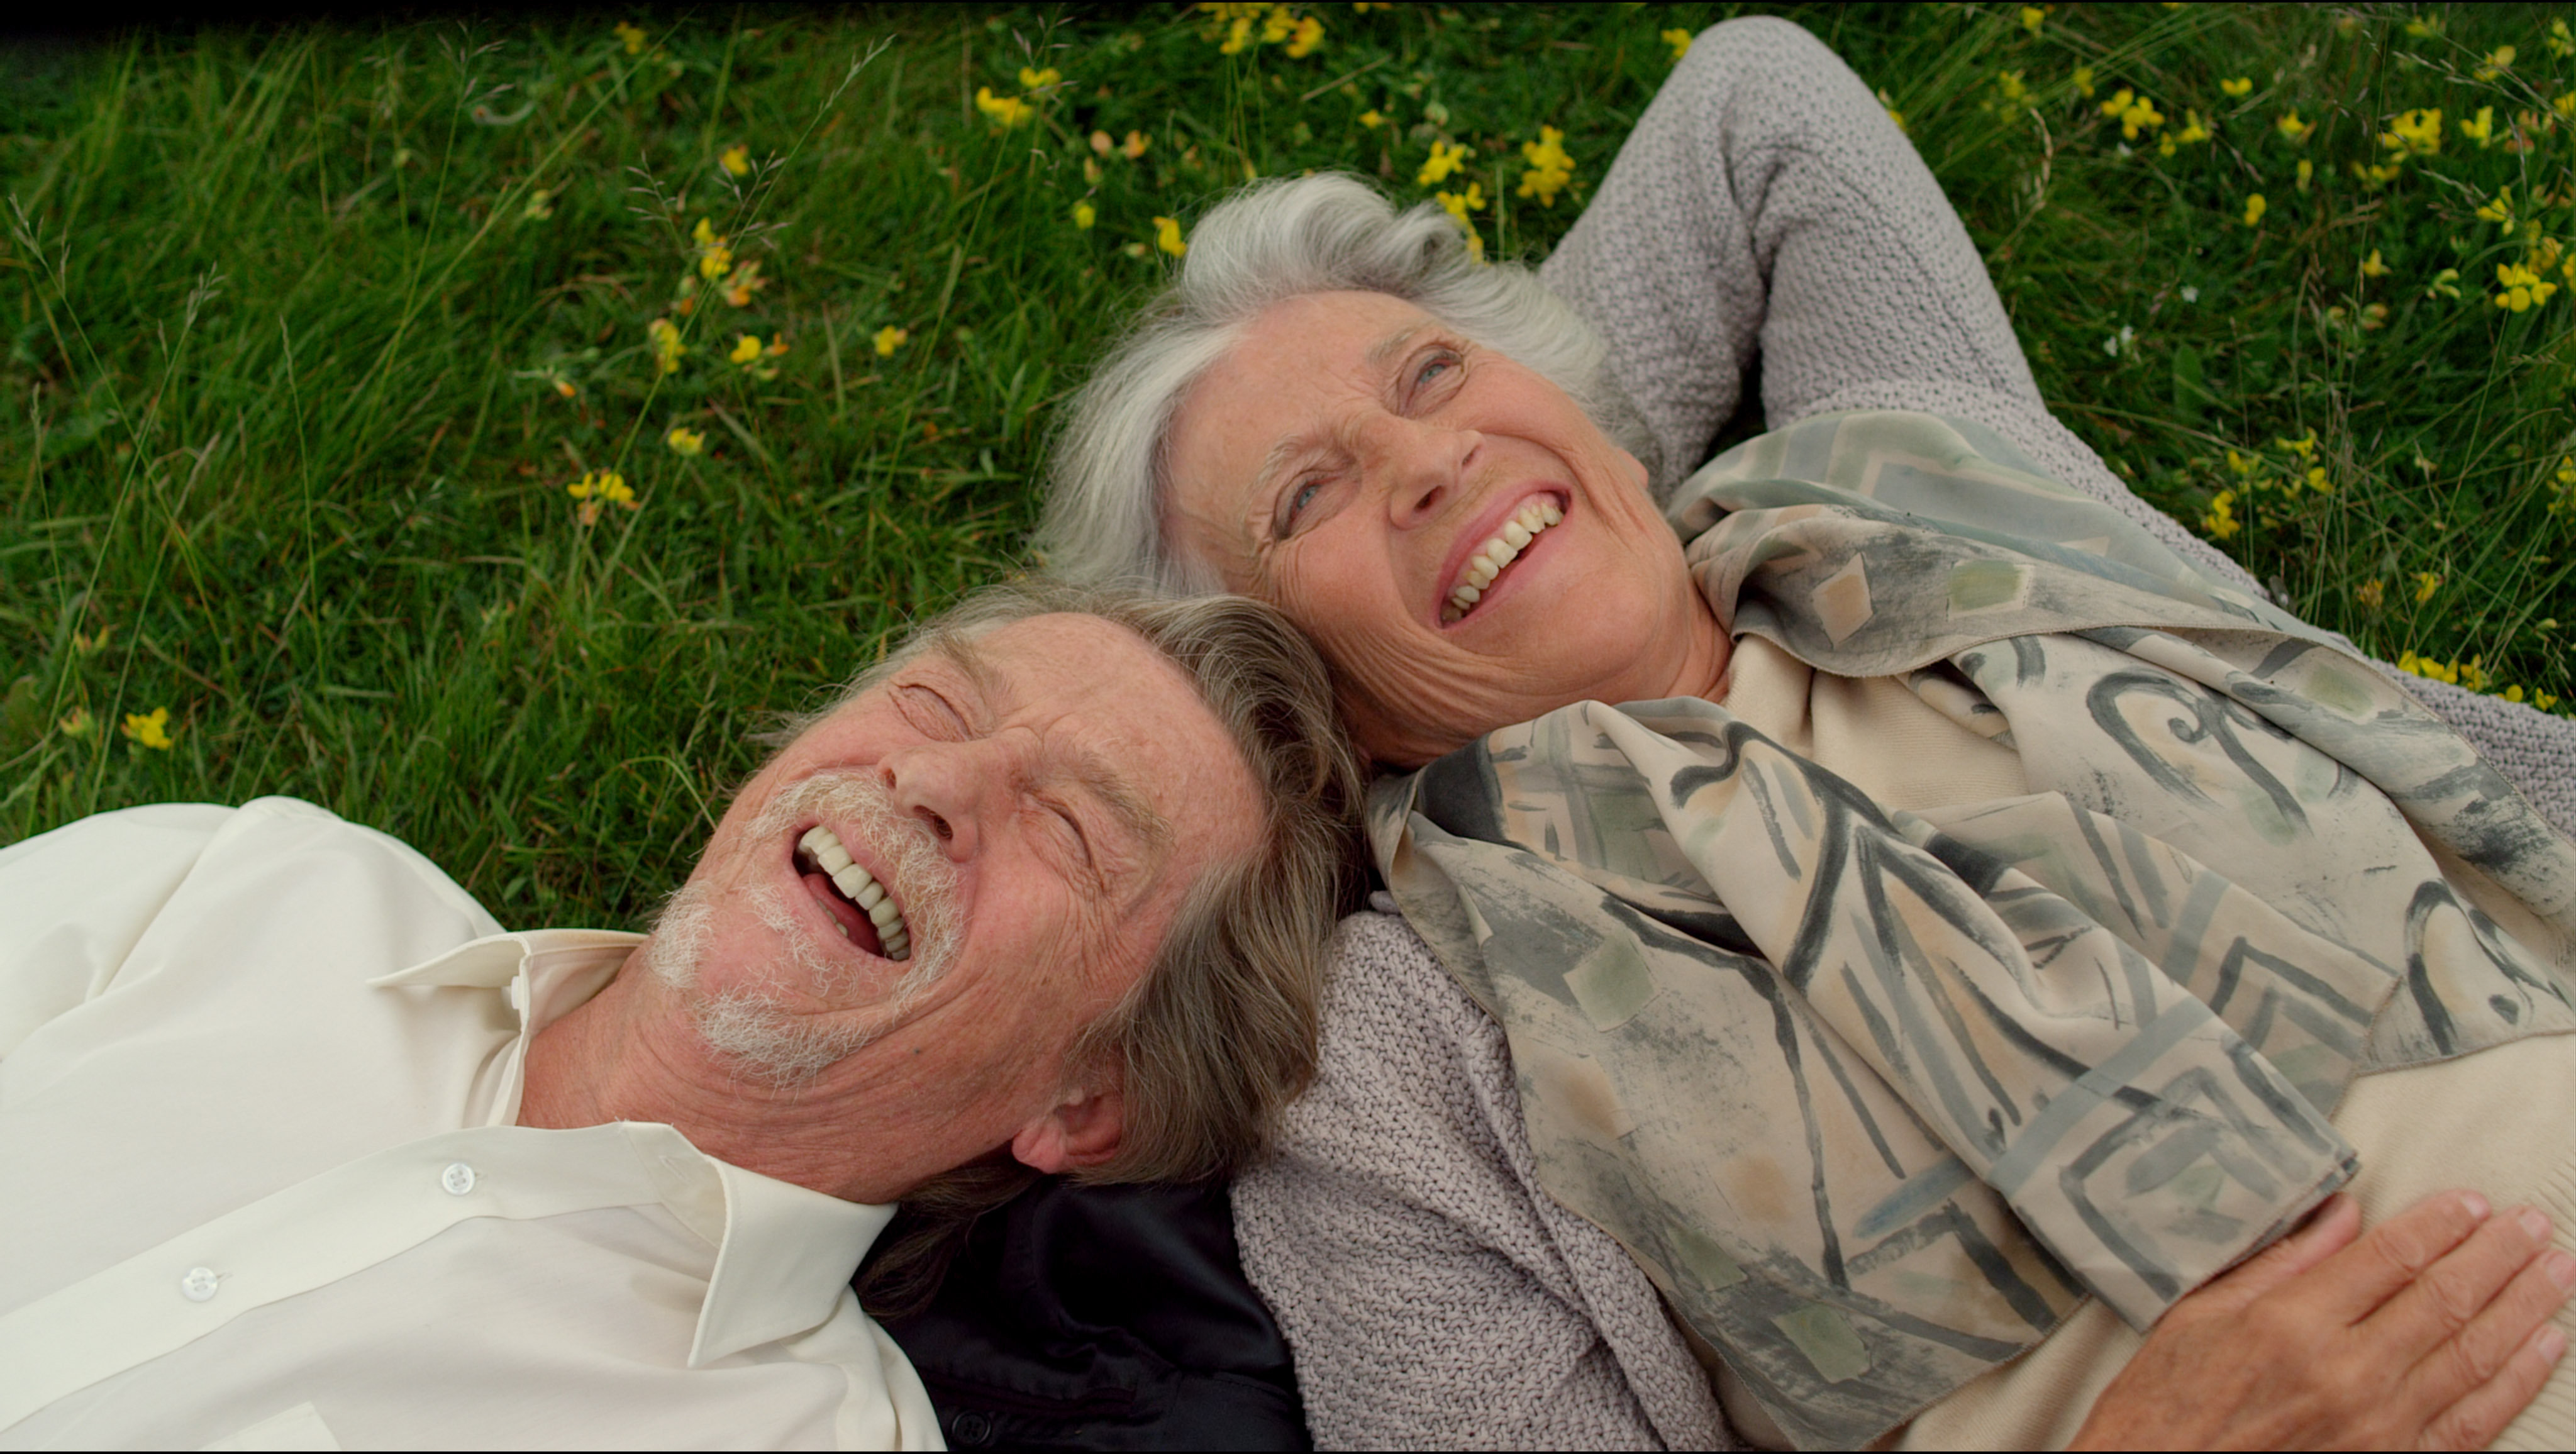 Still of John Hurt and Phyllida Law in Love At First Sight.